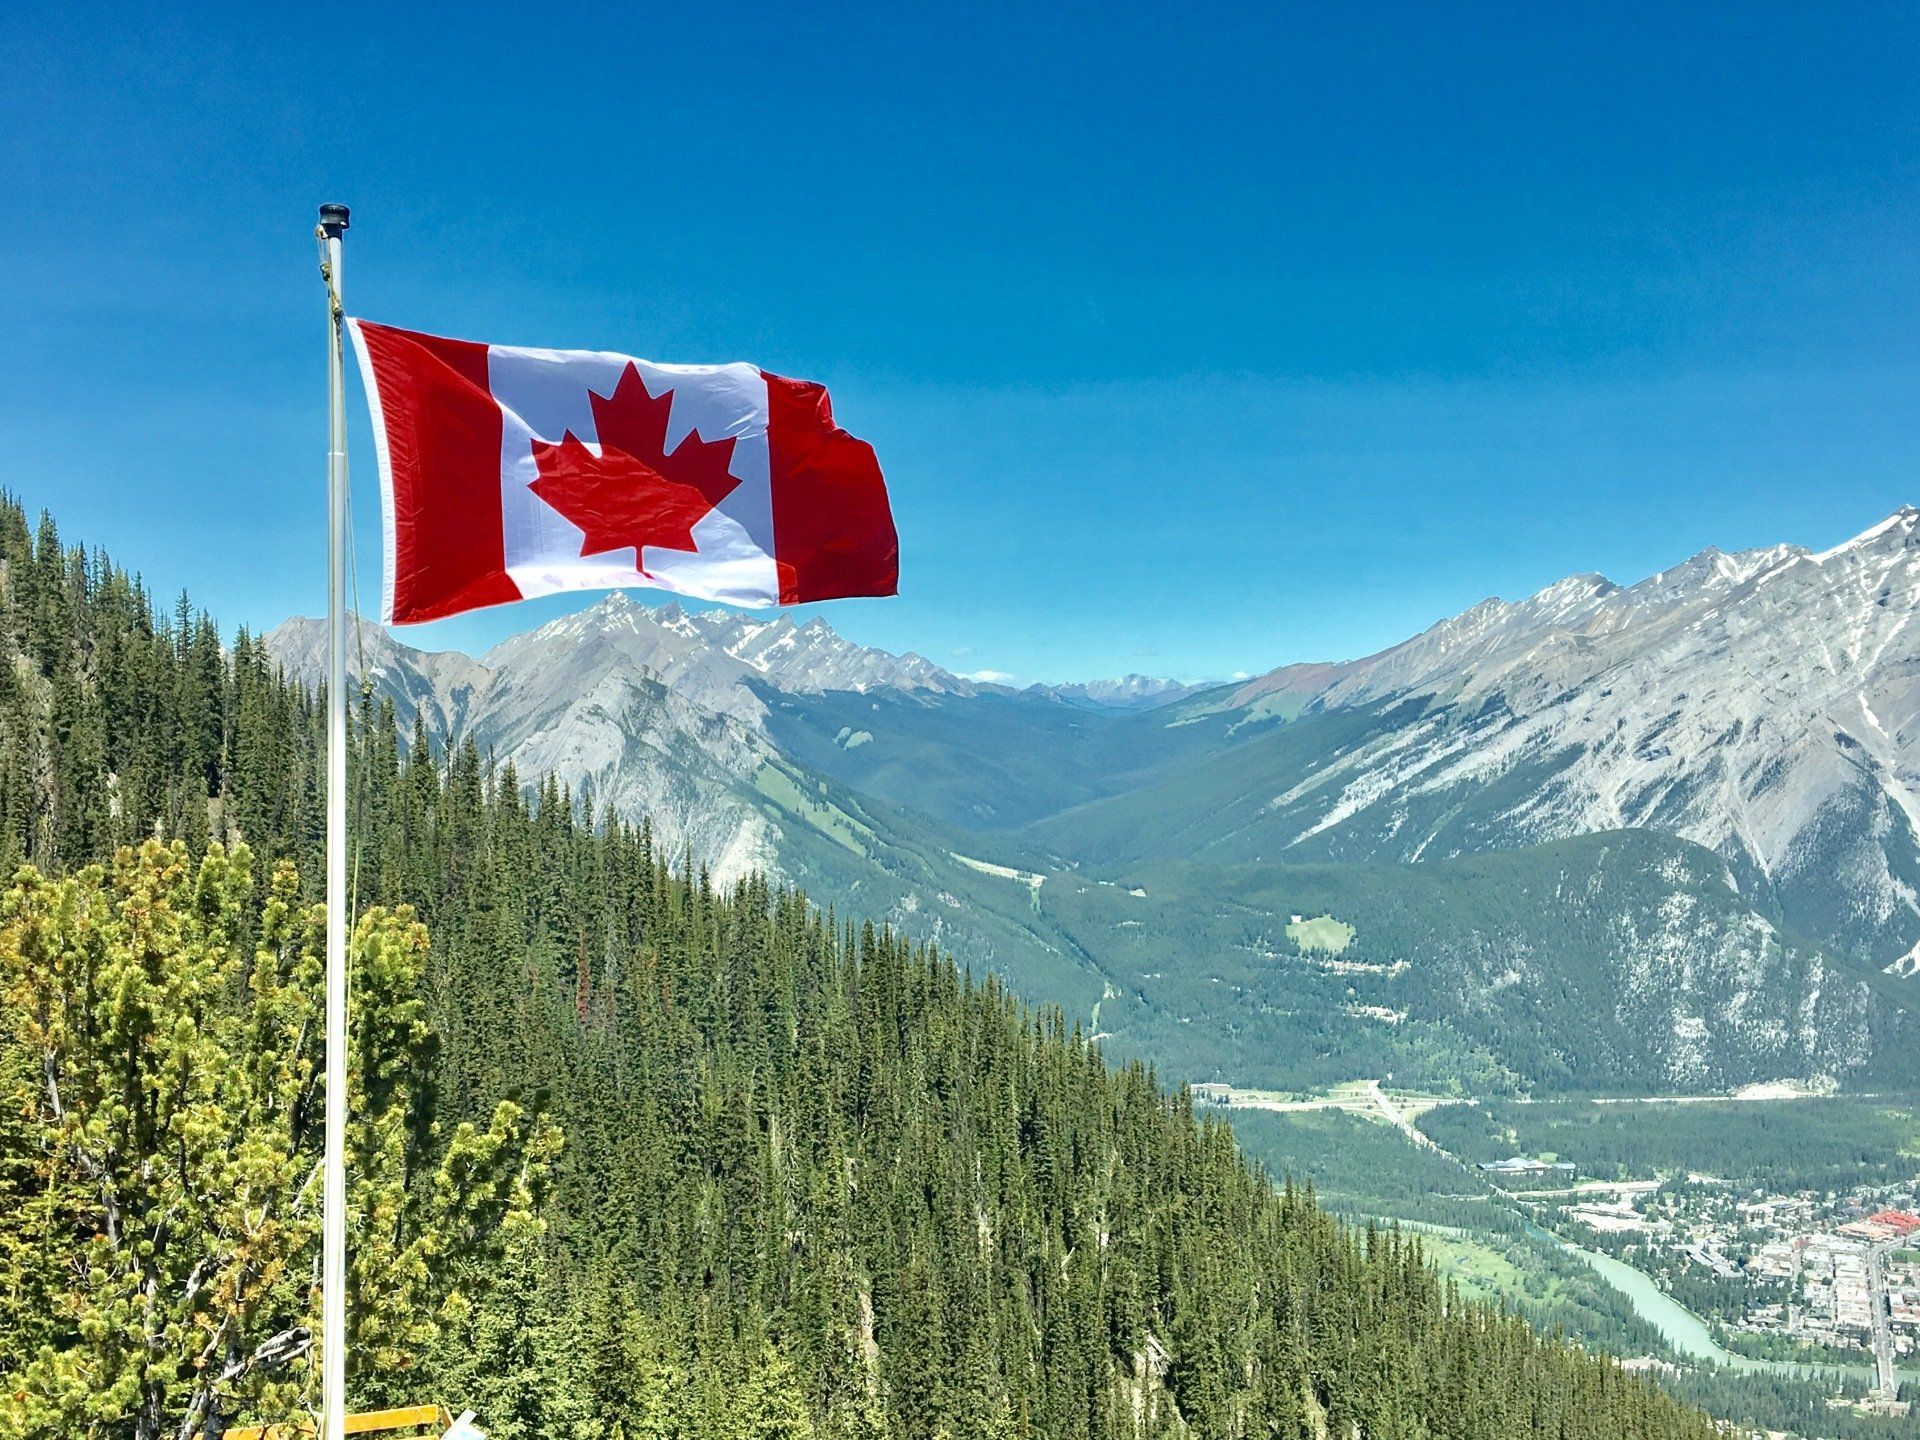 A canadian flag is flying in front of a mountain range